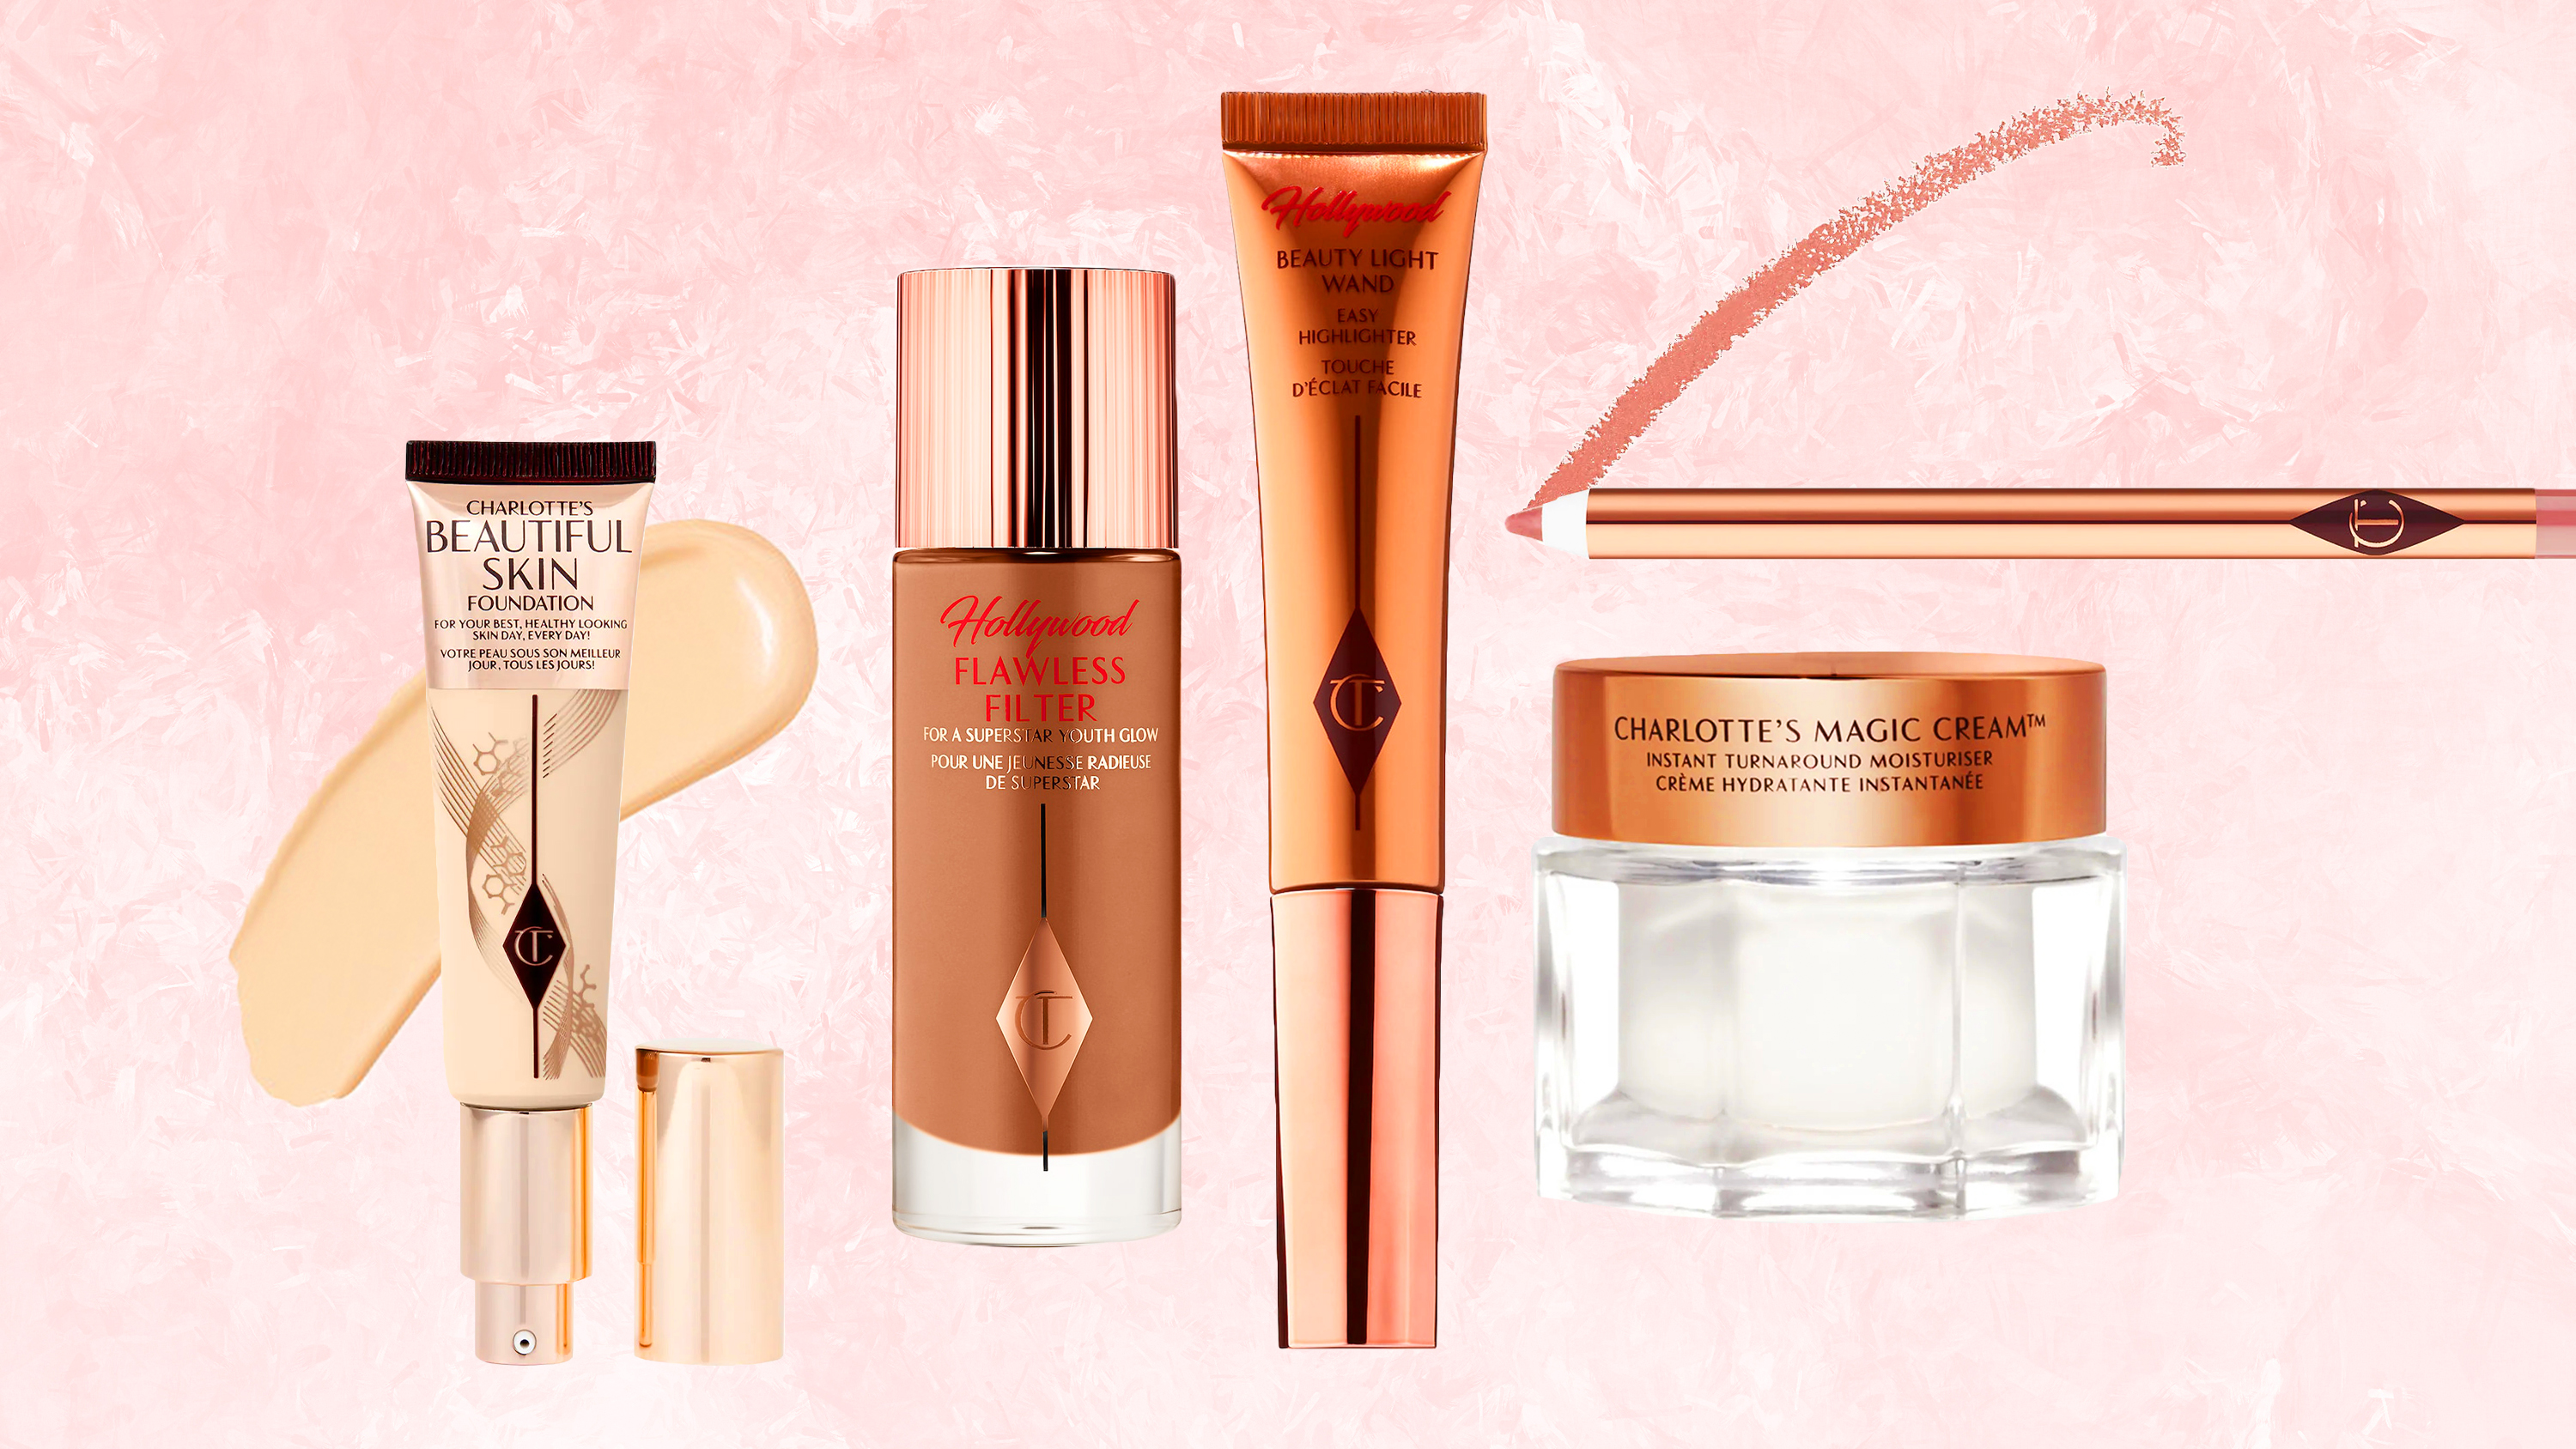 The 10 Best Charlotte Tilbury Products, According to a Beauty